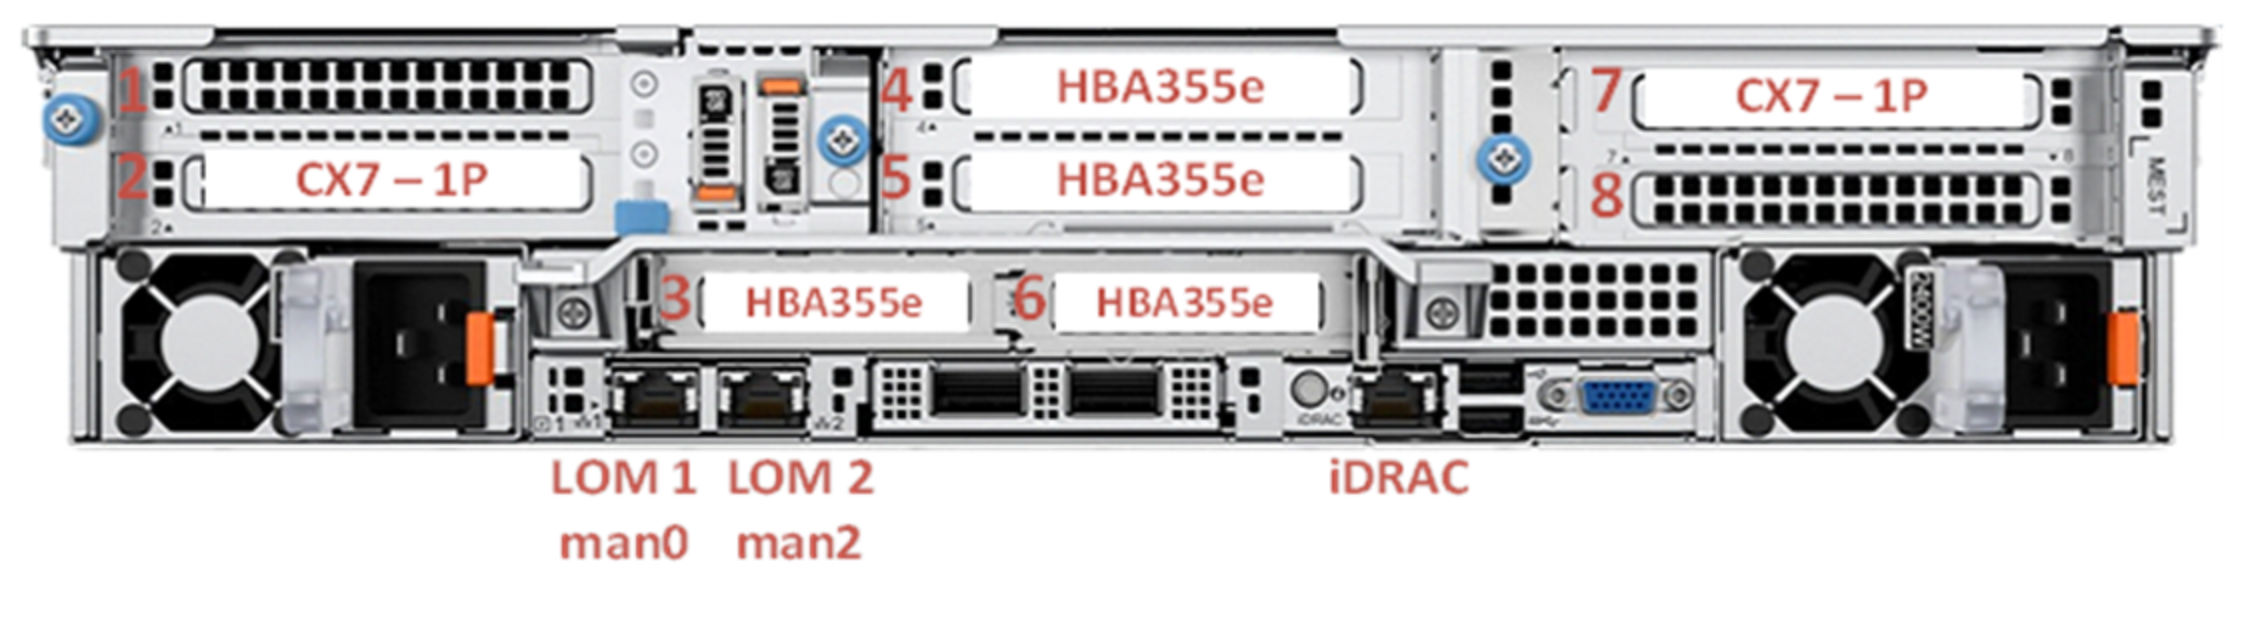 Photograph of the slot allocation in the PowerEdge R760 storage nodes